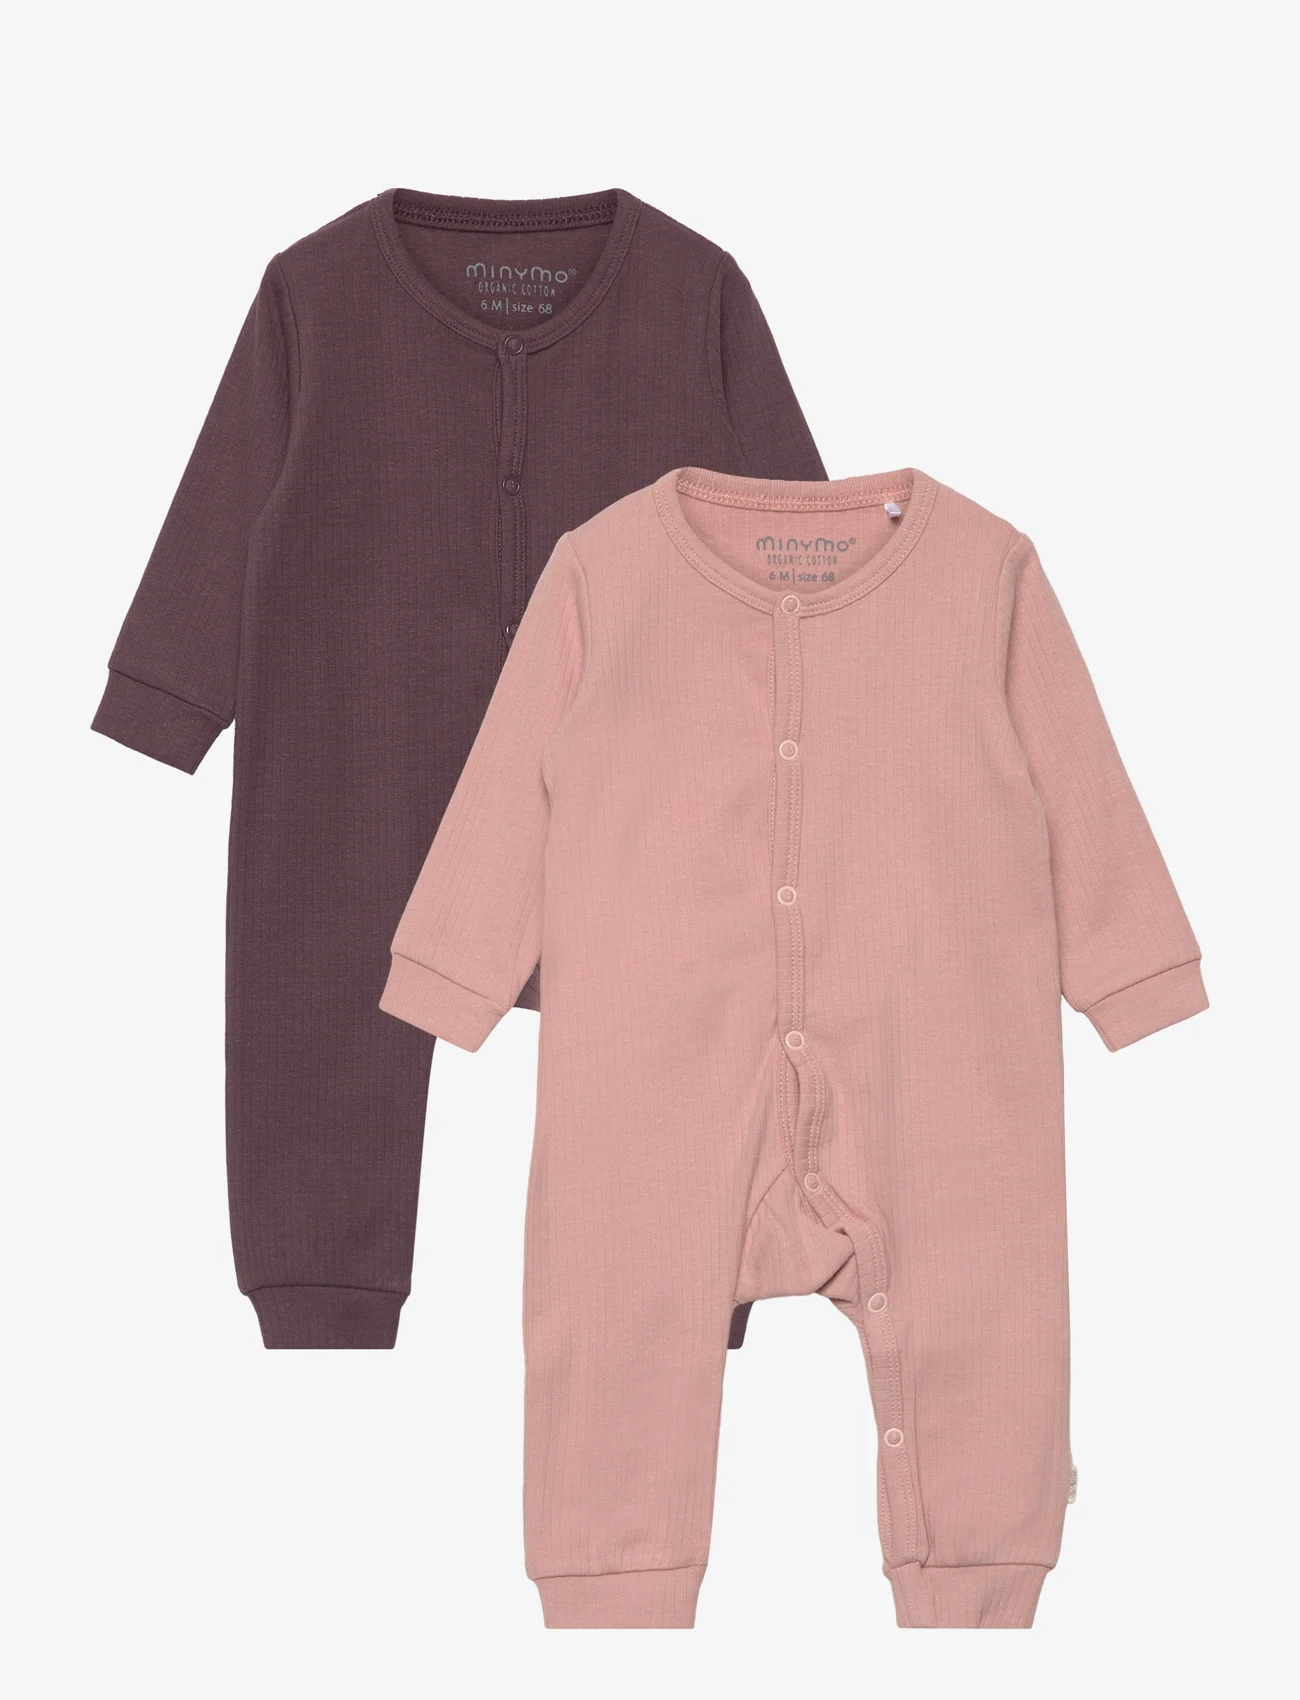 Minymo - Jumpsuit LS (2-pack) - long-sleeved - misty rose - 0